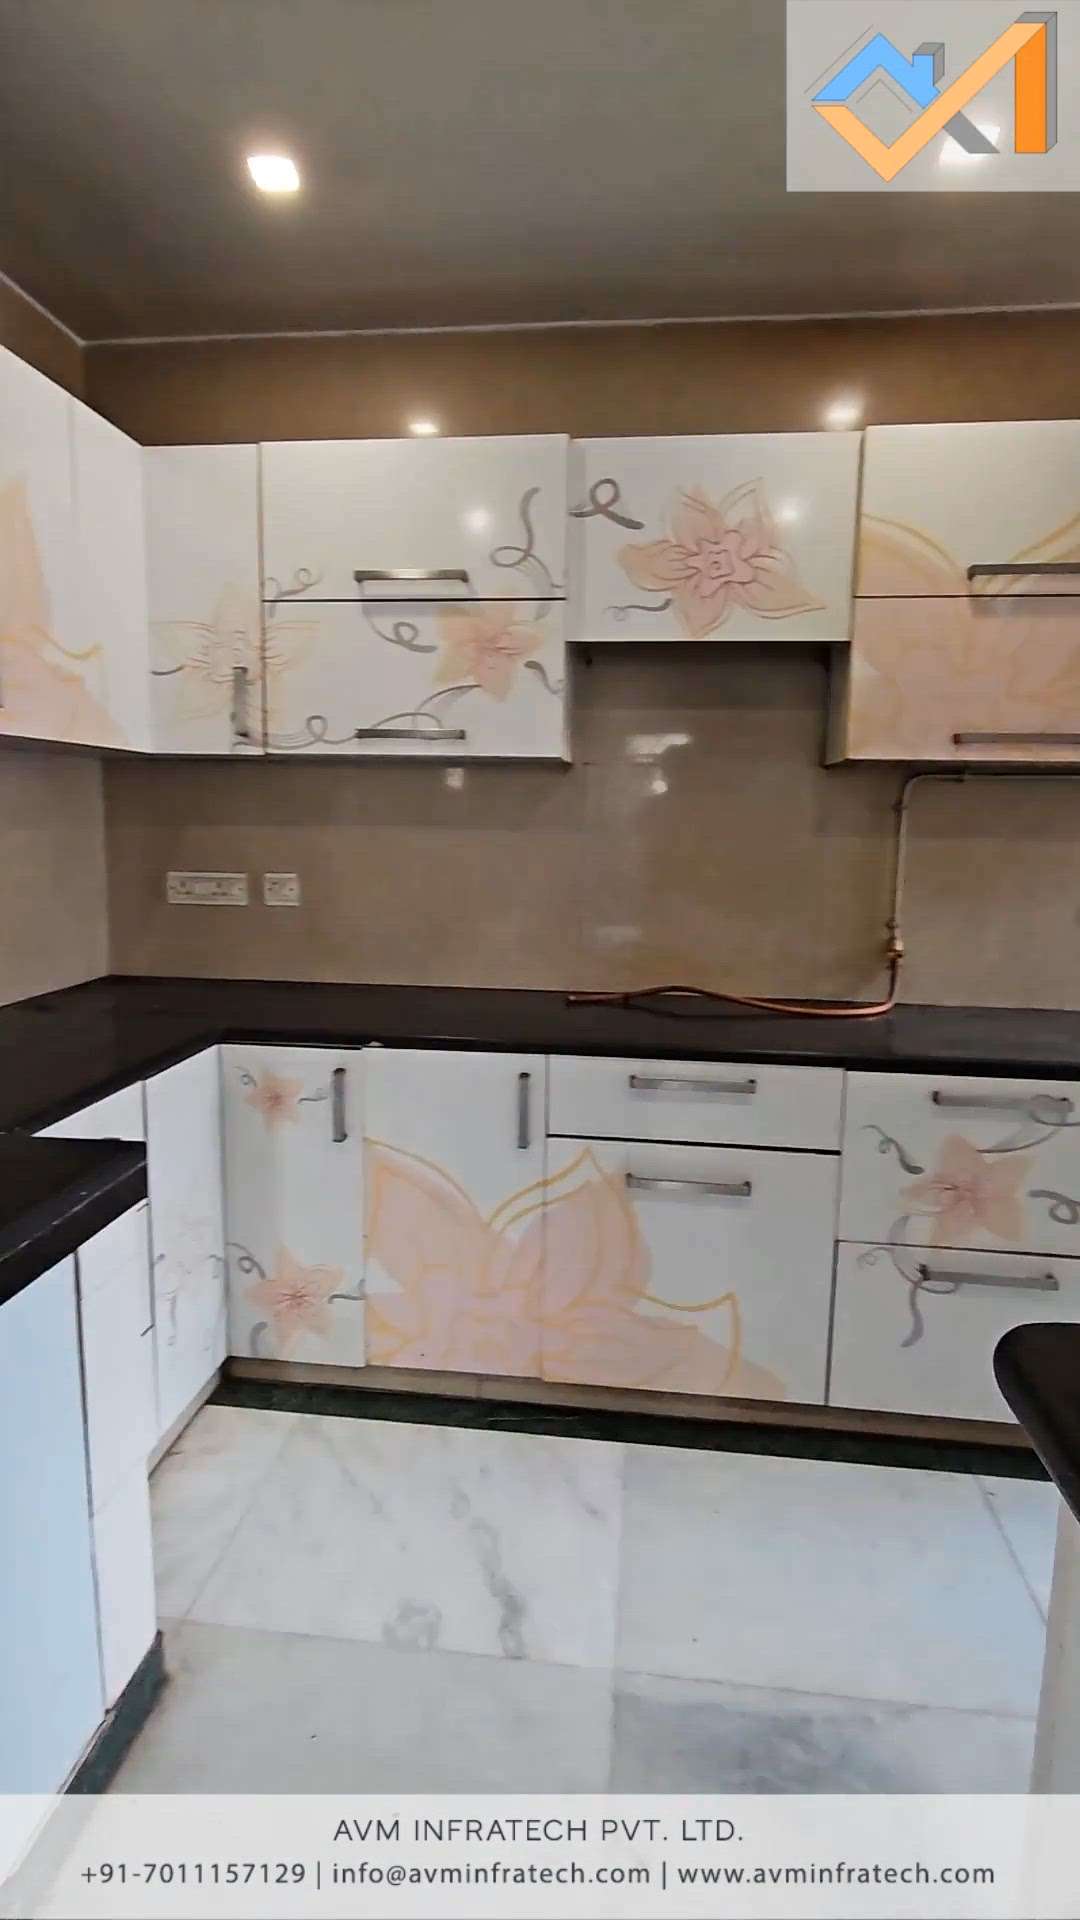 Are you excited to see the transformation of the old damaged kitchen into the new modern modular kitchen? Let's check it out.


Follow us for more such amazing updates.
.
.
#kitchen #kitchendesign #kitchenhack #kitchenlighting #kitchendecor #kitcheninspiration #kitchenrenovation #kitchenremodel #kitchenset #kitchenideas #kitchengoals #kitcheninspo #kitchenisland #kitchencabinets #avminfratech